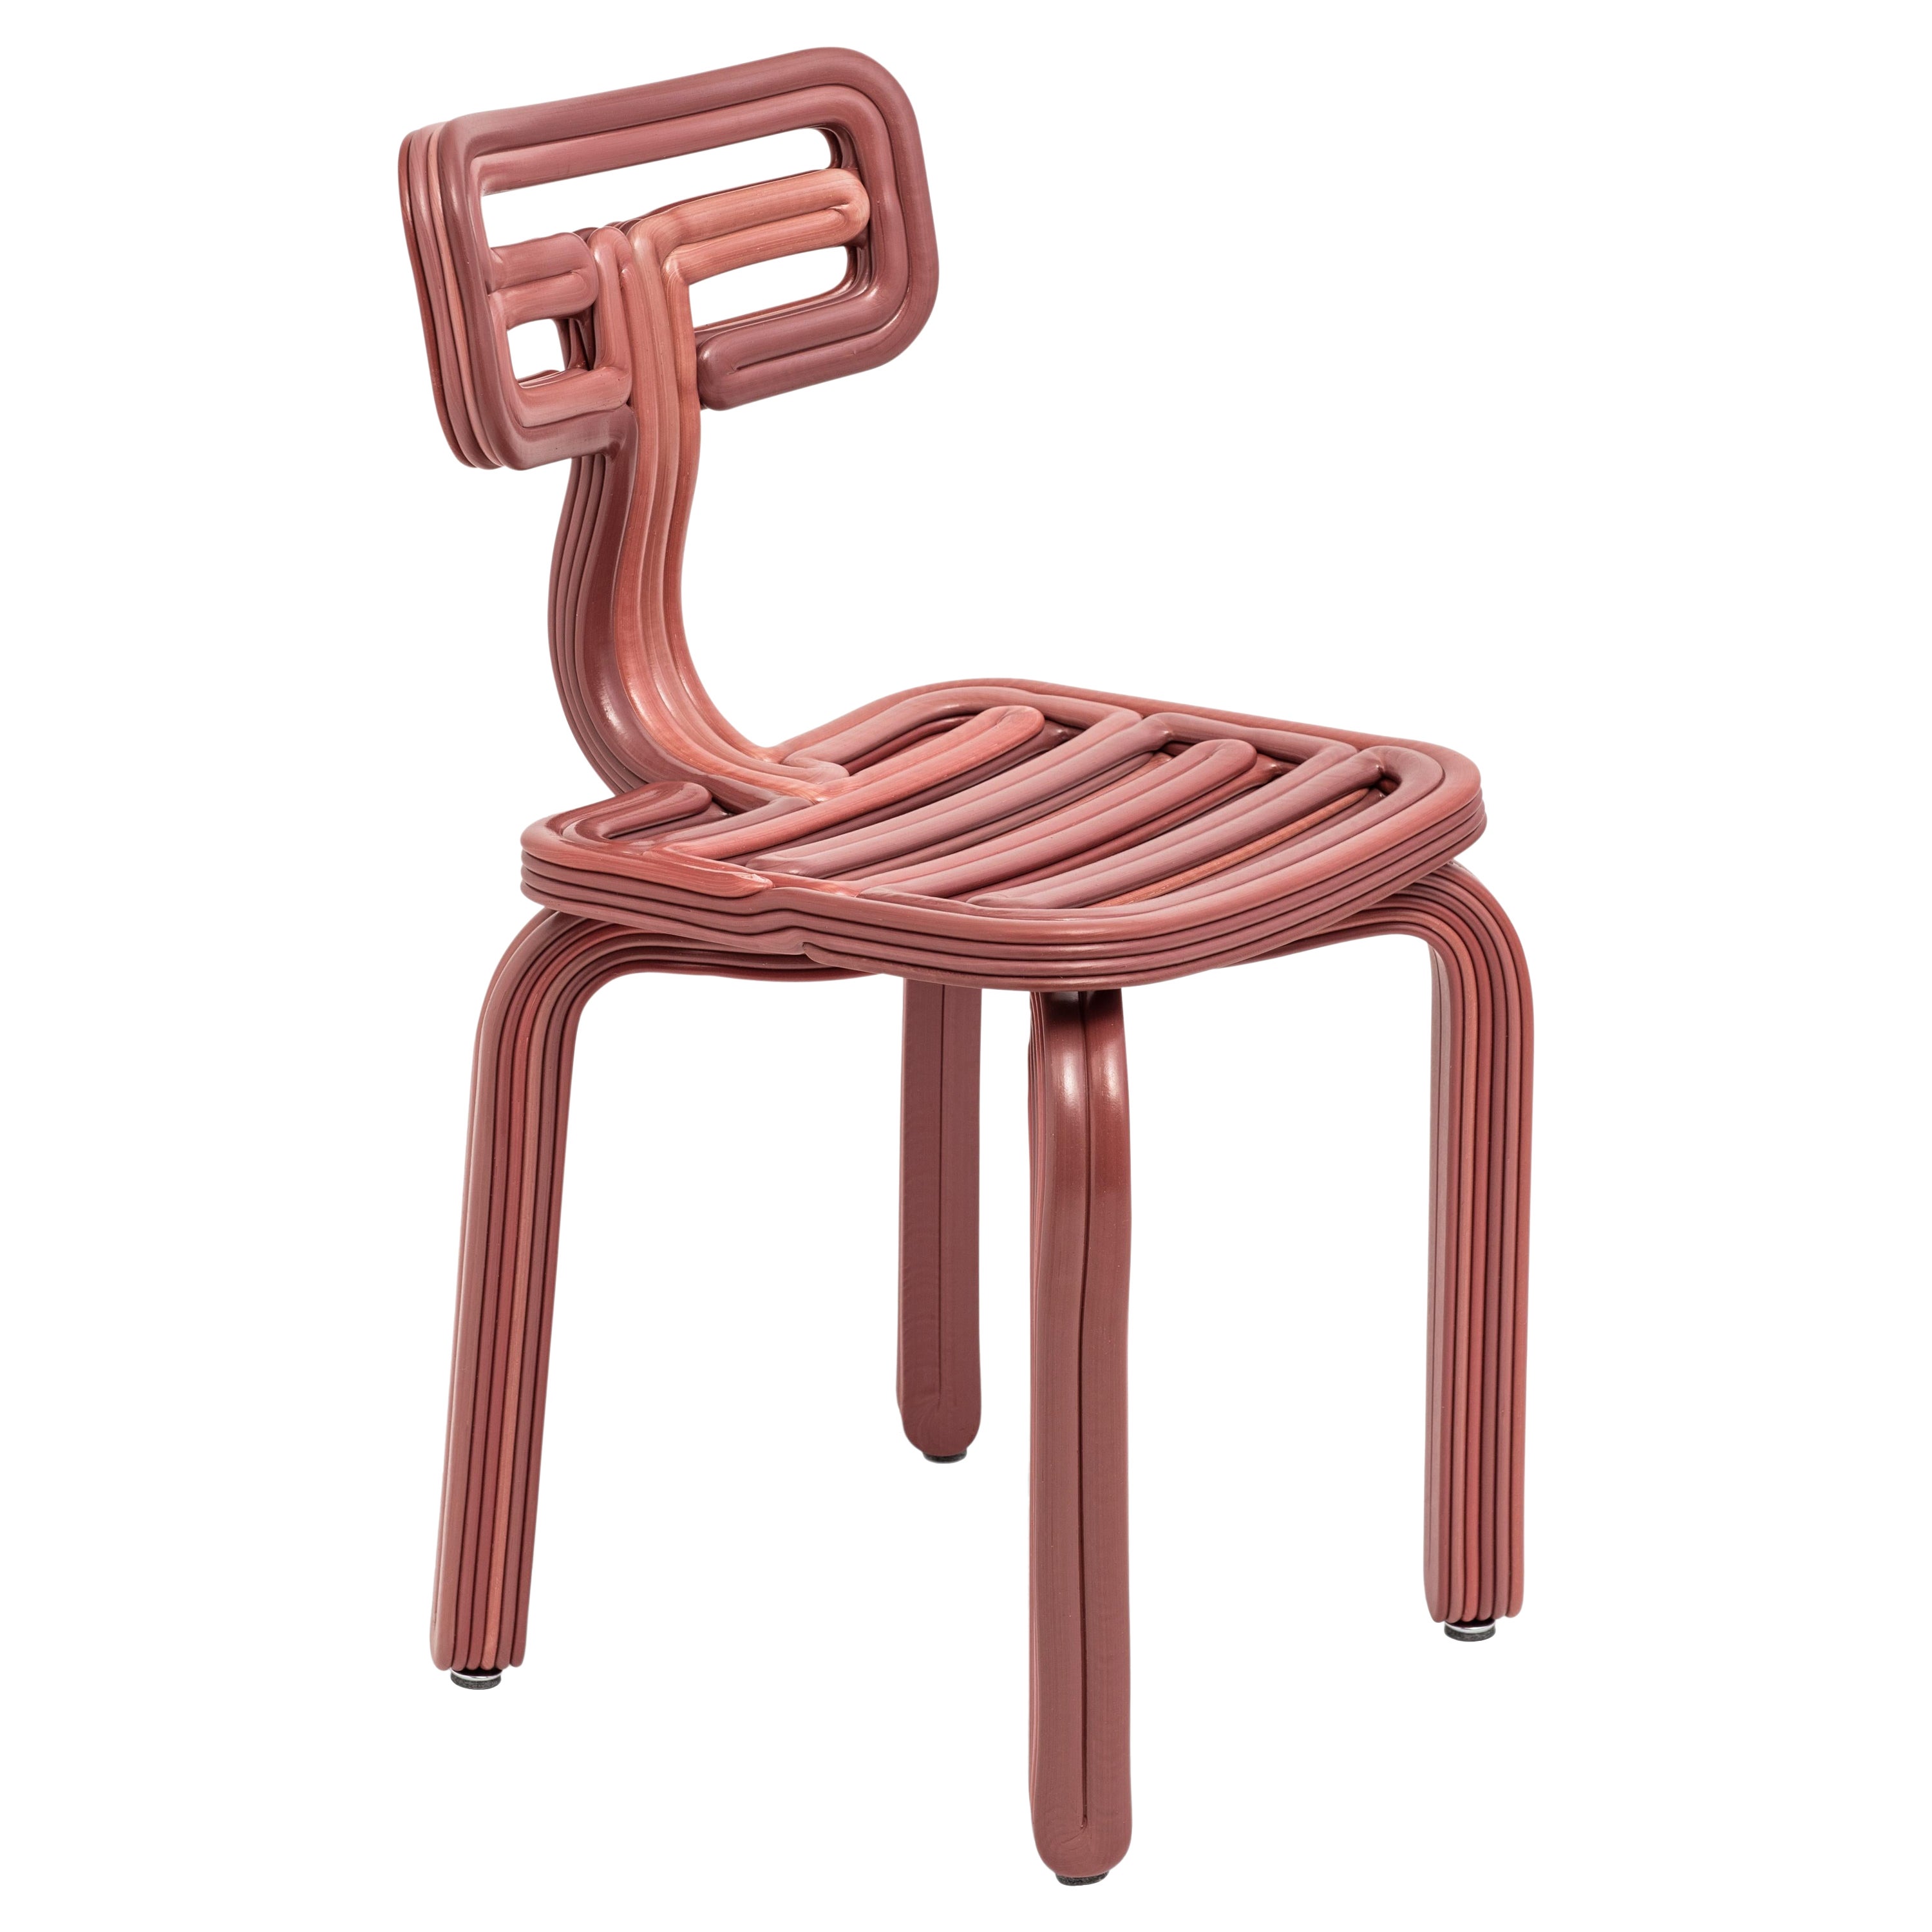 Chubby Chair in Brick 3D Printed recycled plastic